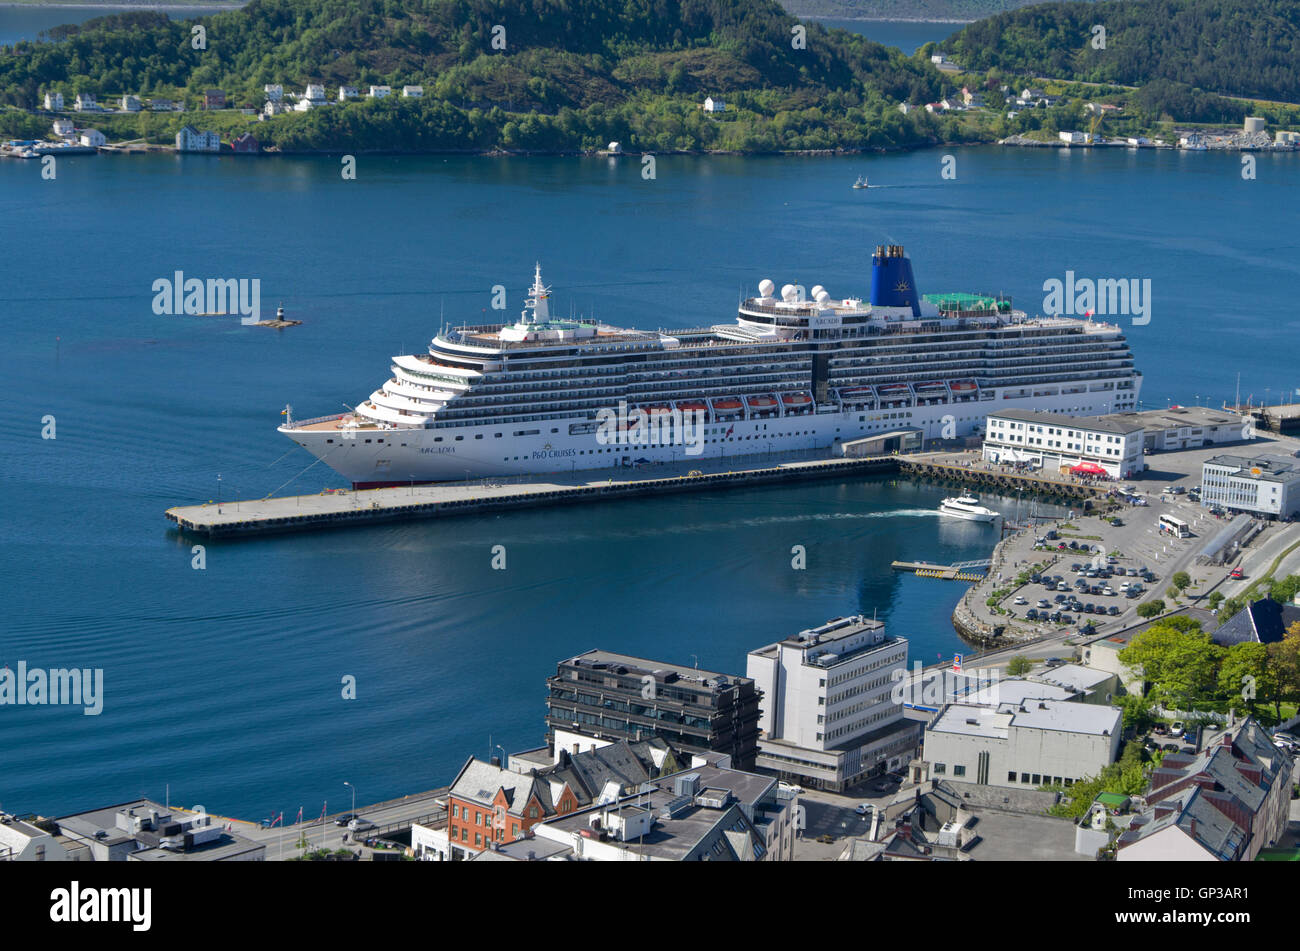 From a viewpoint high above the town, an aerial view of Alesund, Norway; cruise ship Arcadia in the centre. Stock Photo